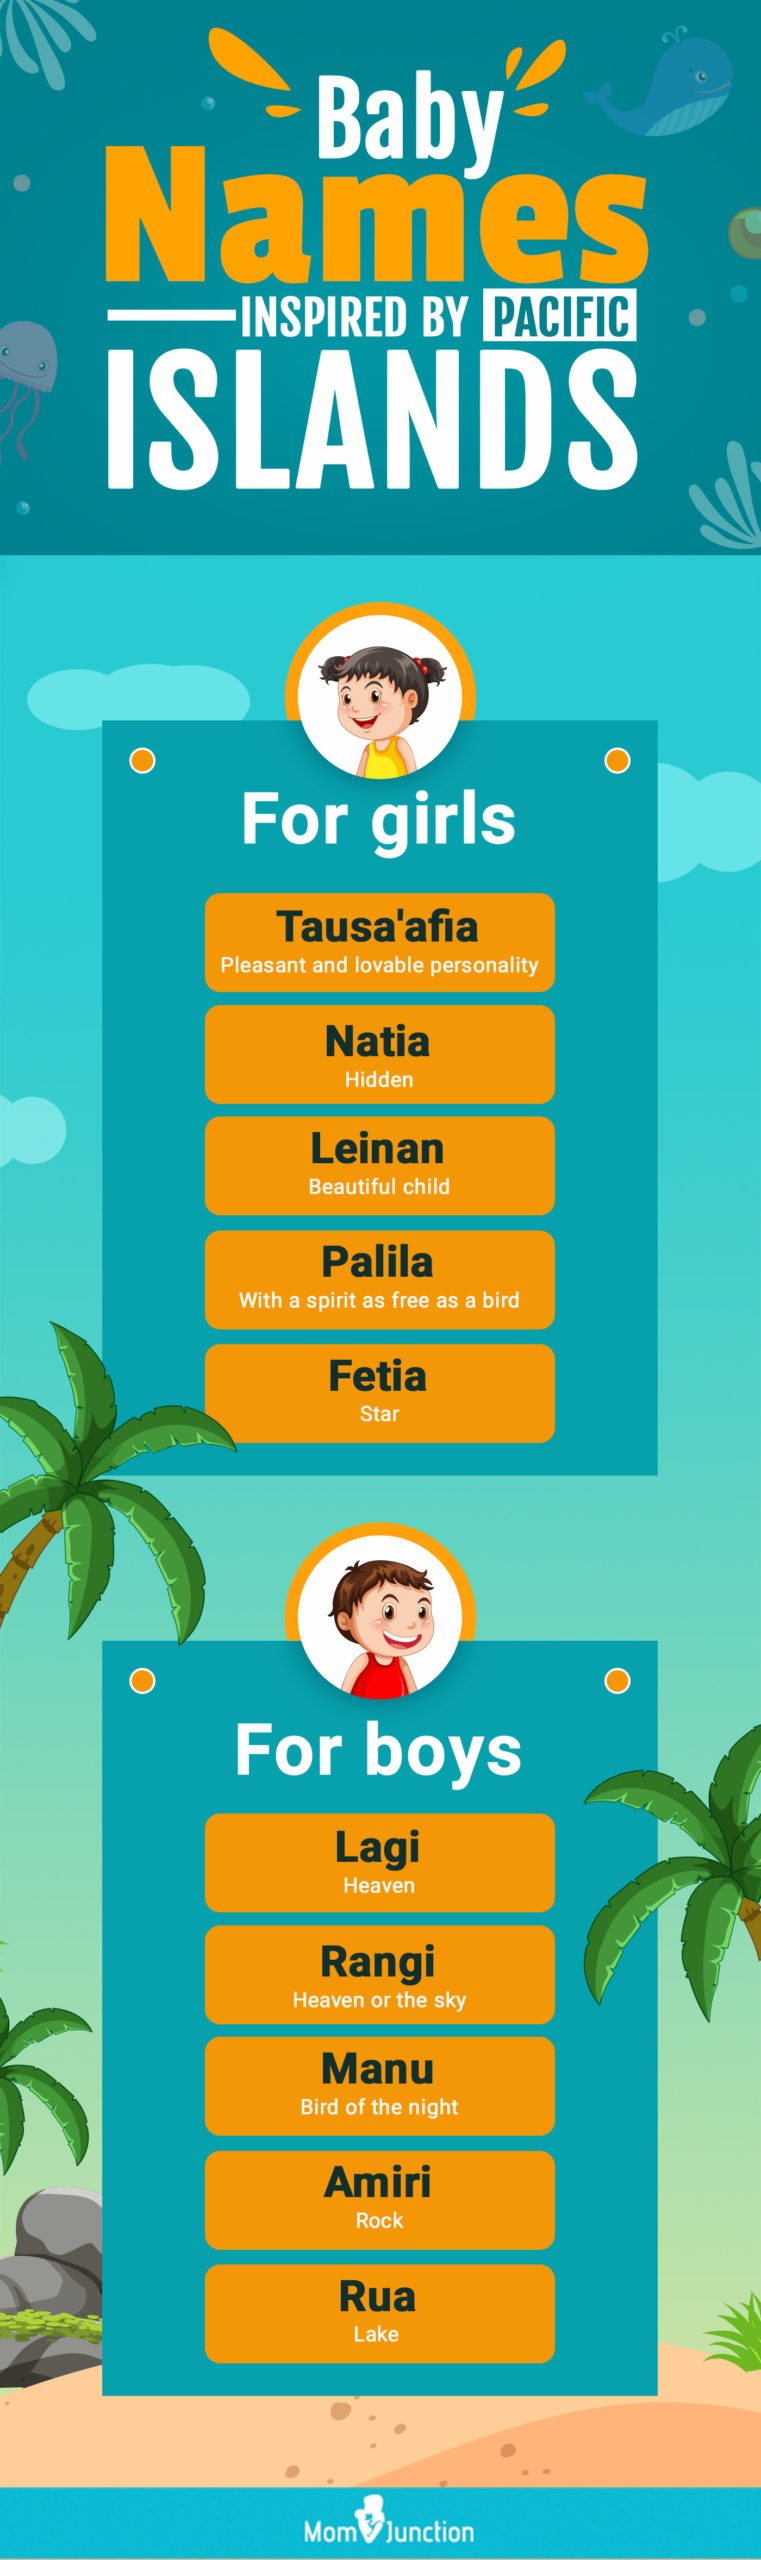 baby names inspired by island (infographic)